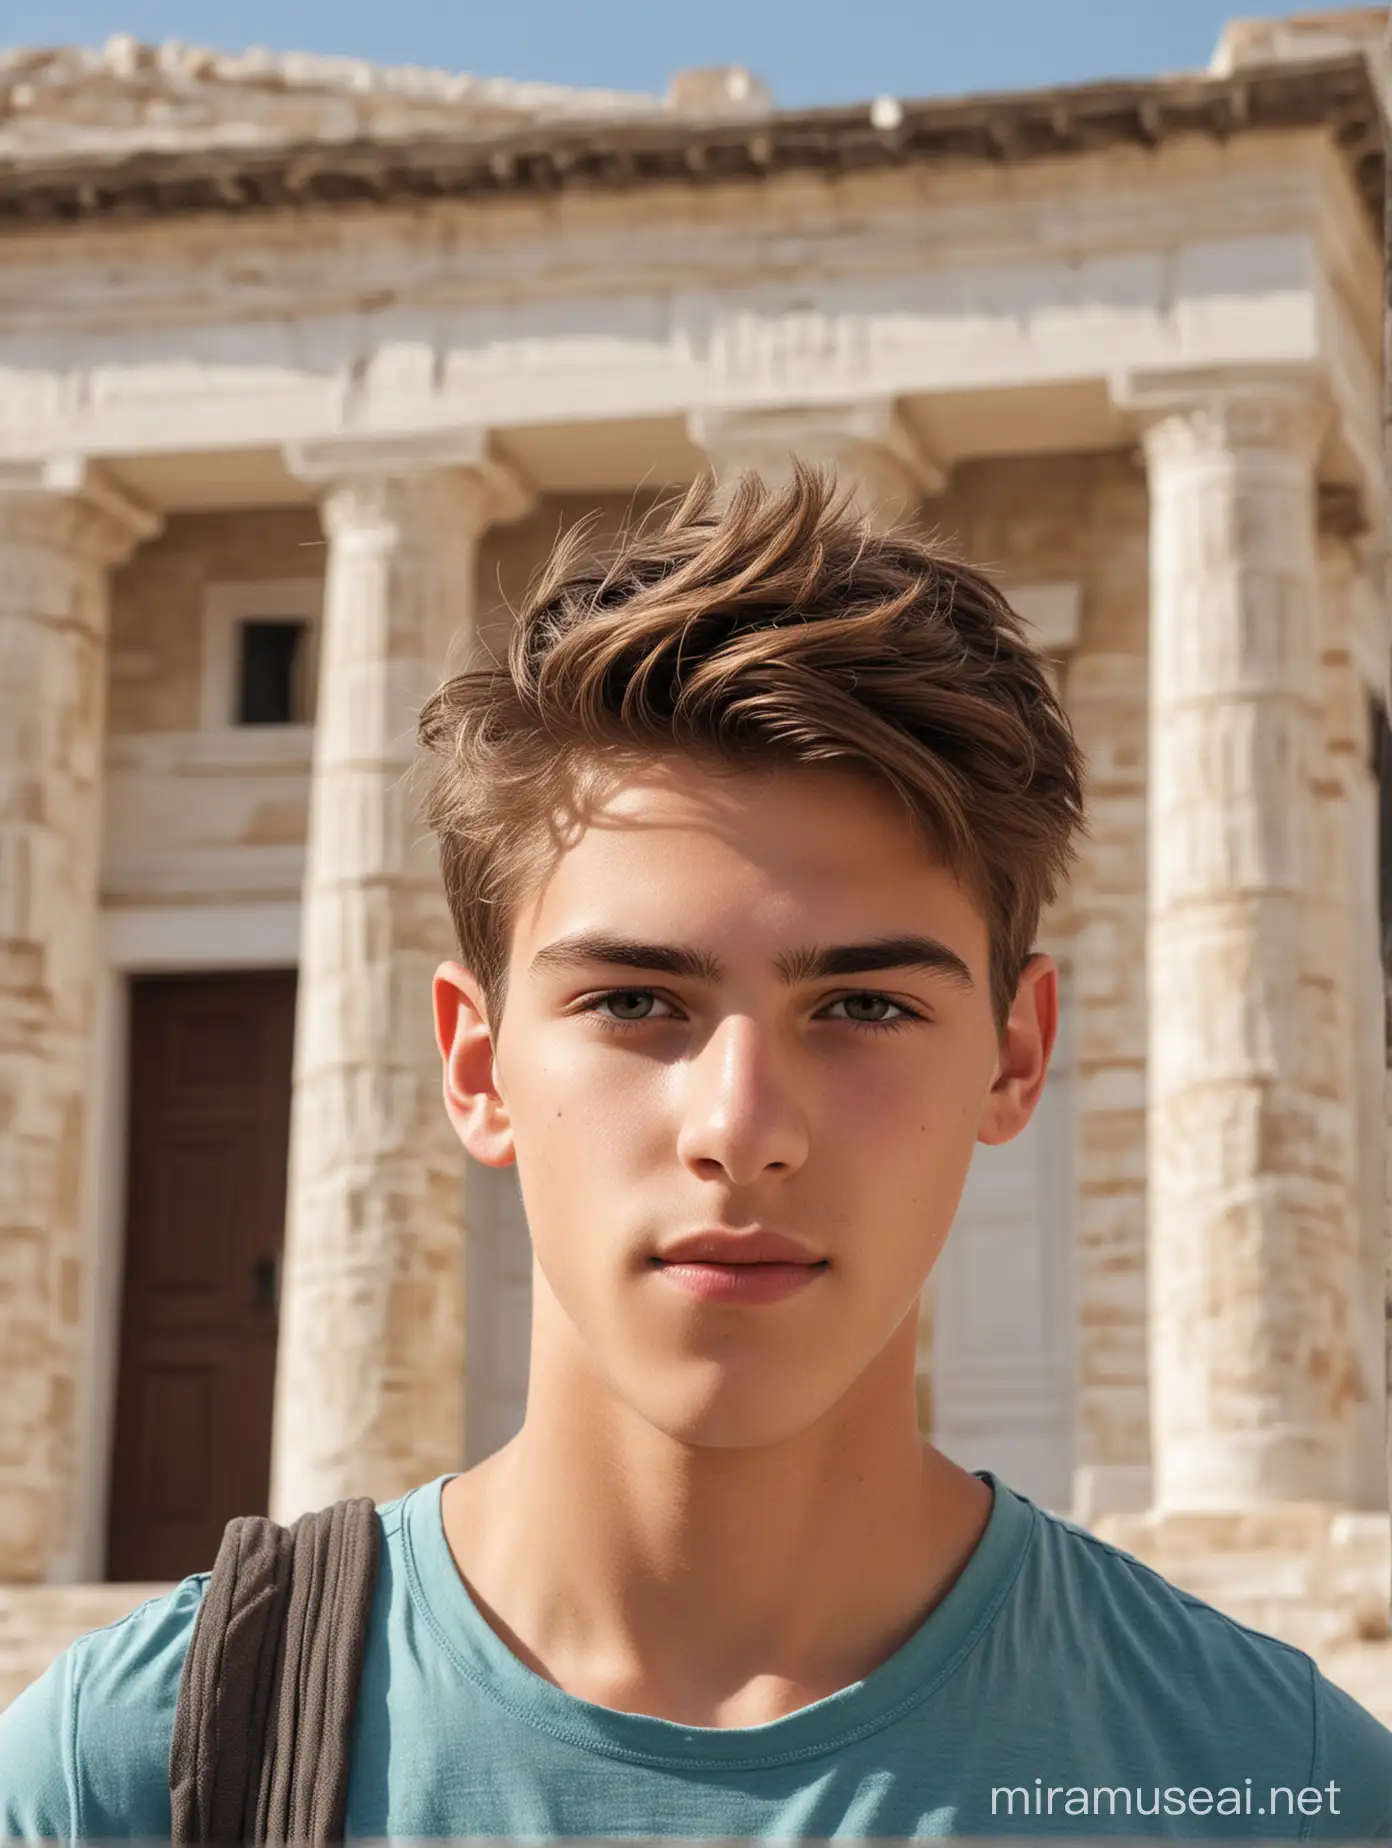 16 year old cute model boy close up in front of a Greek building